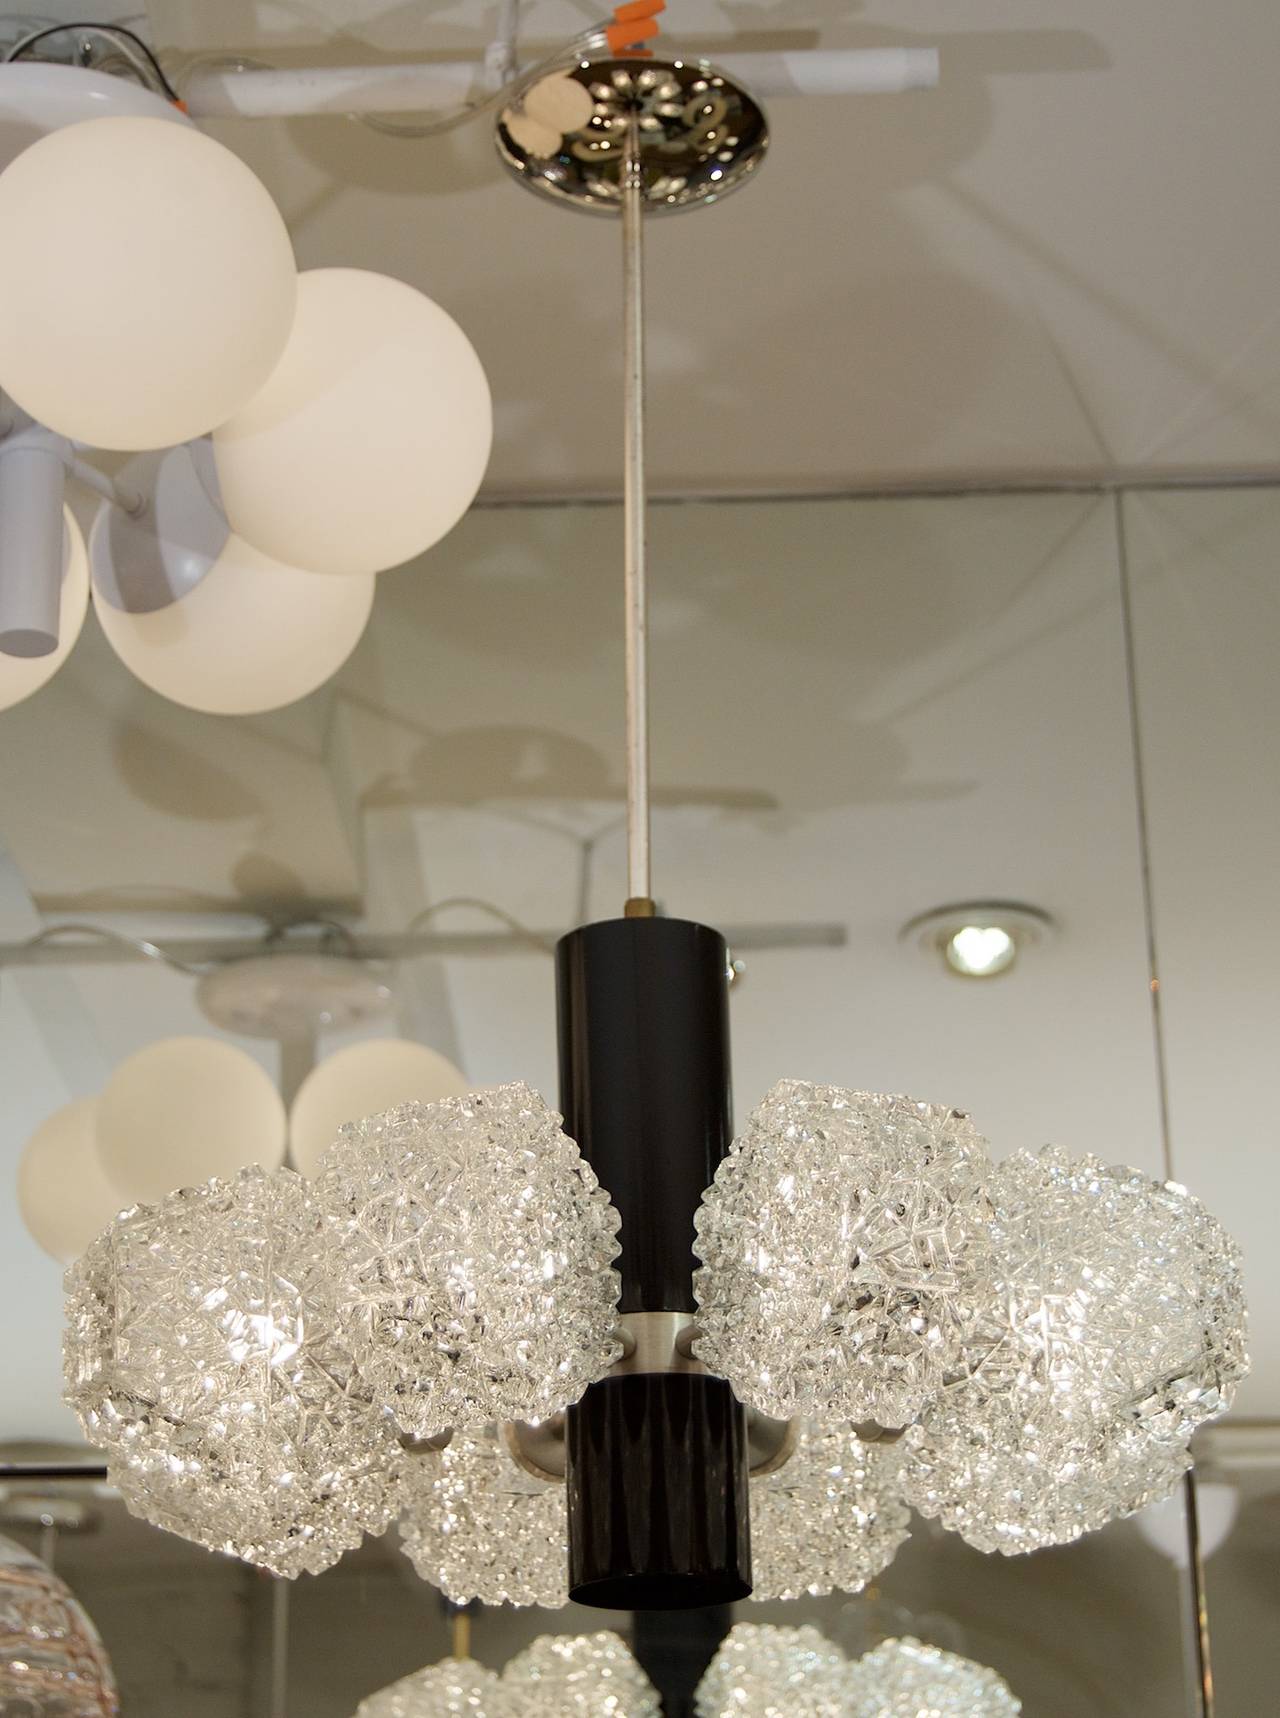 A gorgeous eight-light chandelier by Temde Leuchten with unusual hexagonal form glass covers. Brushed metal and gloss ebony finish on chandelier body.

Glass can be rotated a full 360 degrees for any arrangement of symmetric or random orientation;